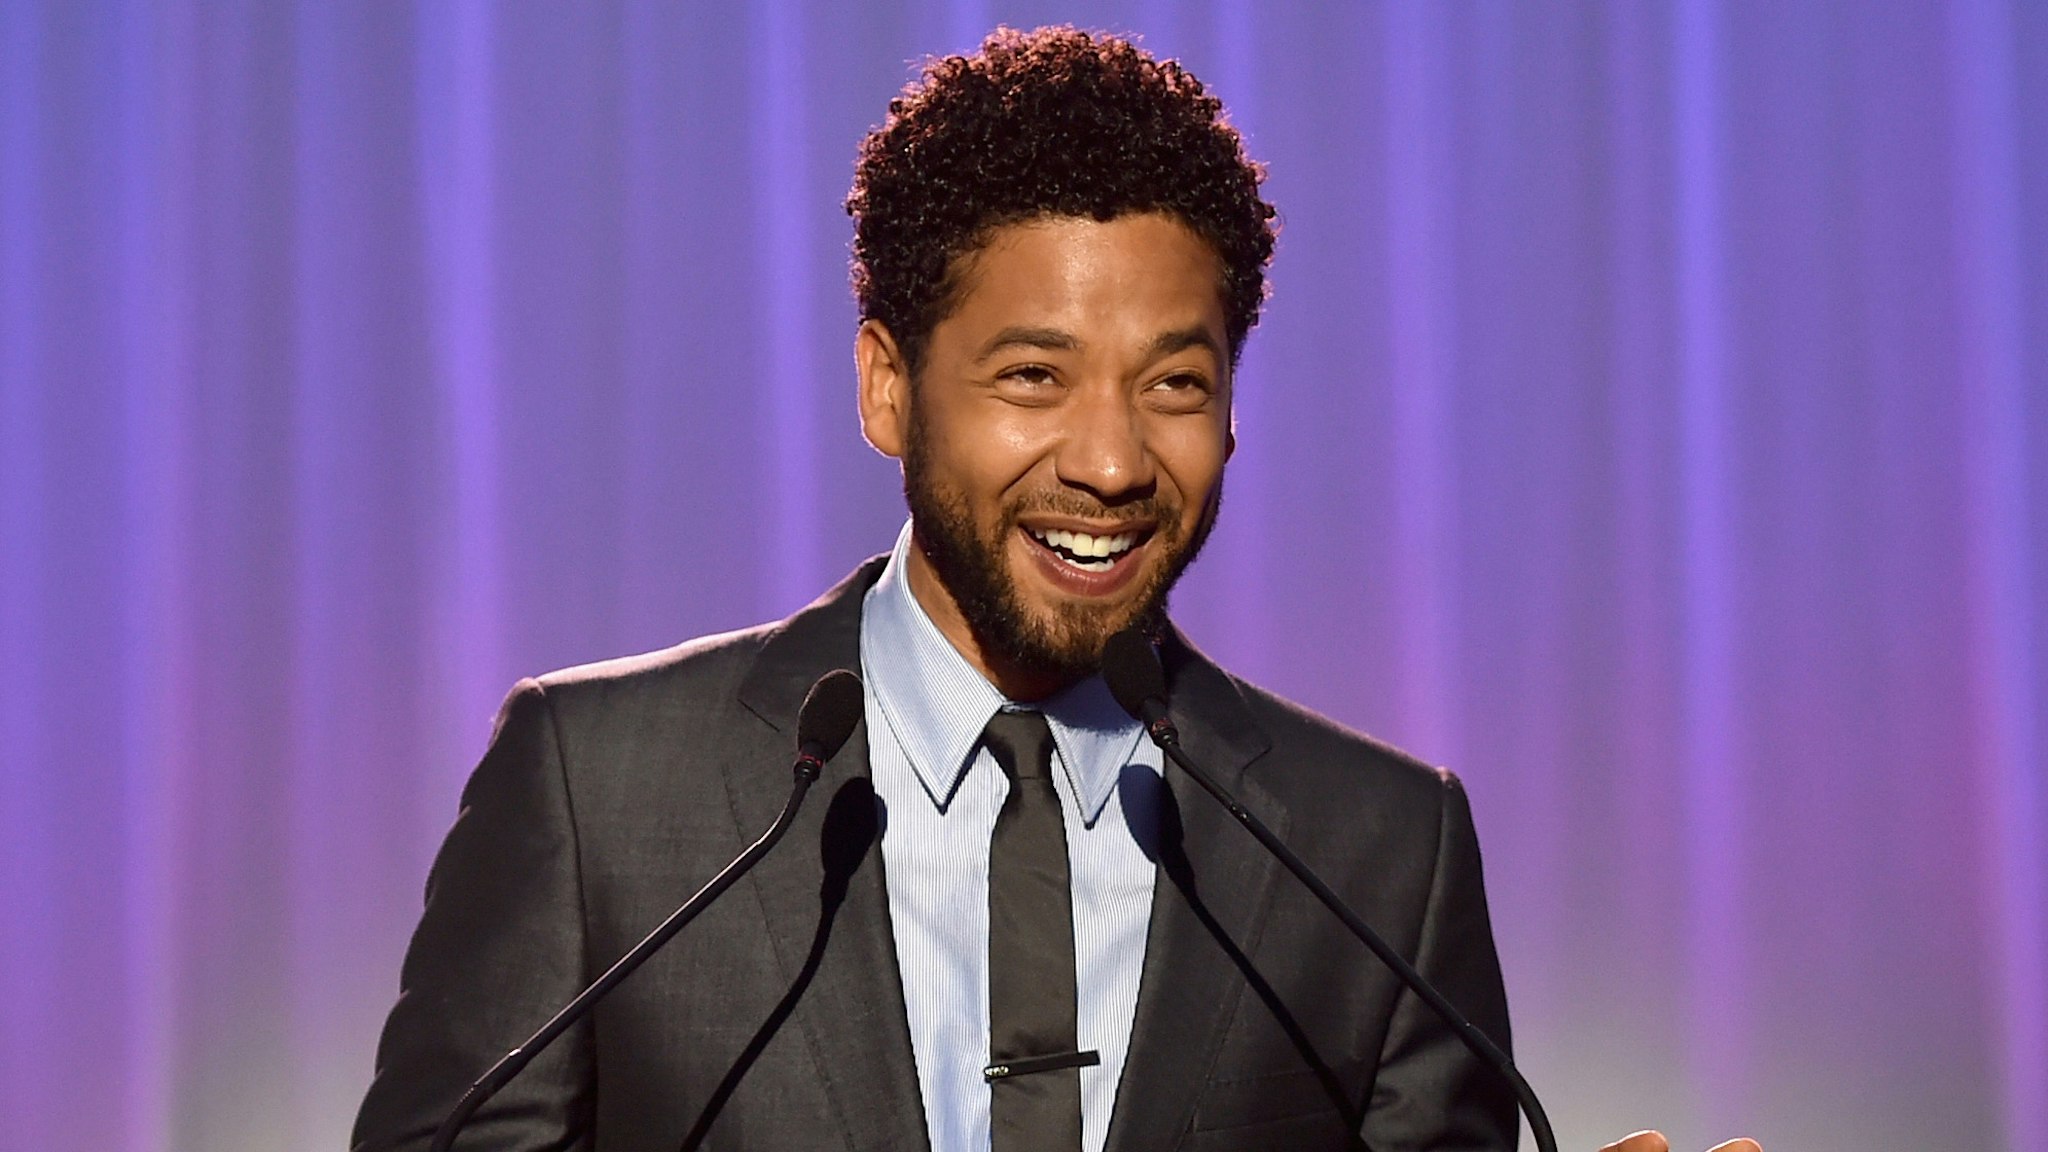 LOS ANGELES, CA - JUNE 03: Host Jussie Smollett speaks onstage at the 16th Annual Chrysalis Butterfly Ball on June 3, 2017 in Los Angeles, California.